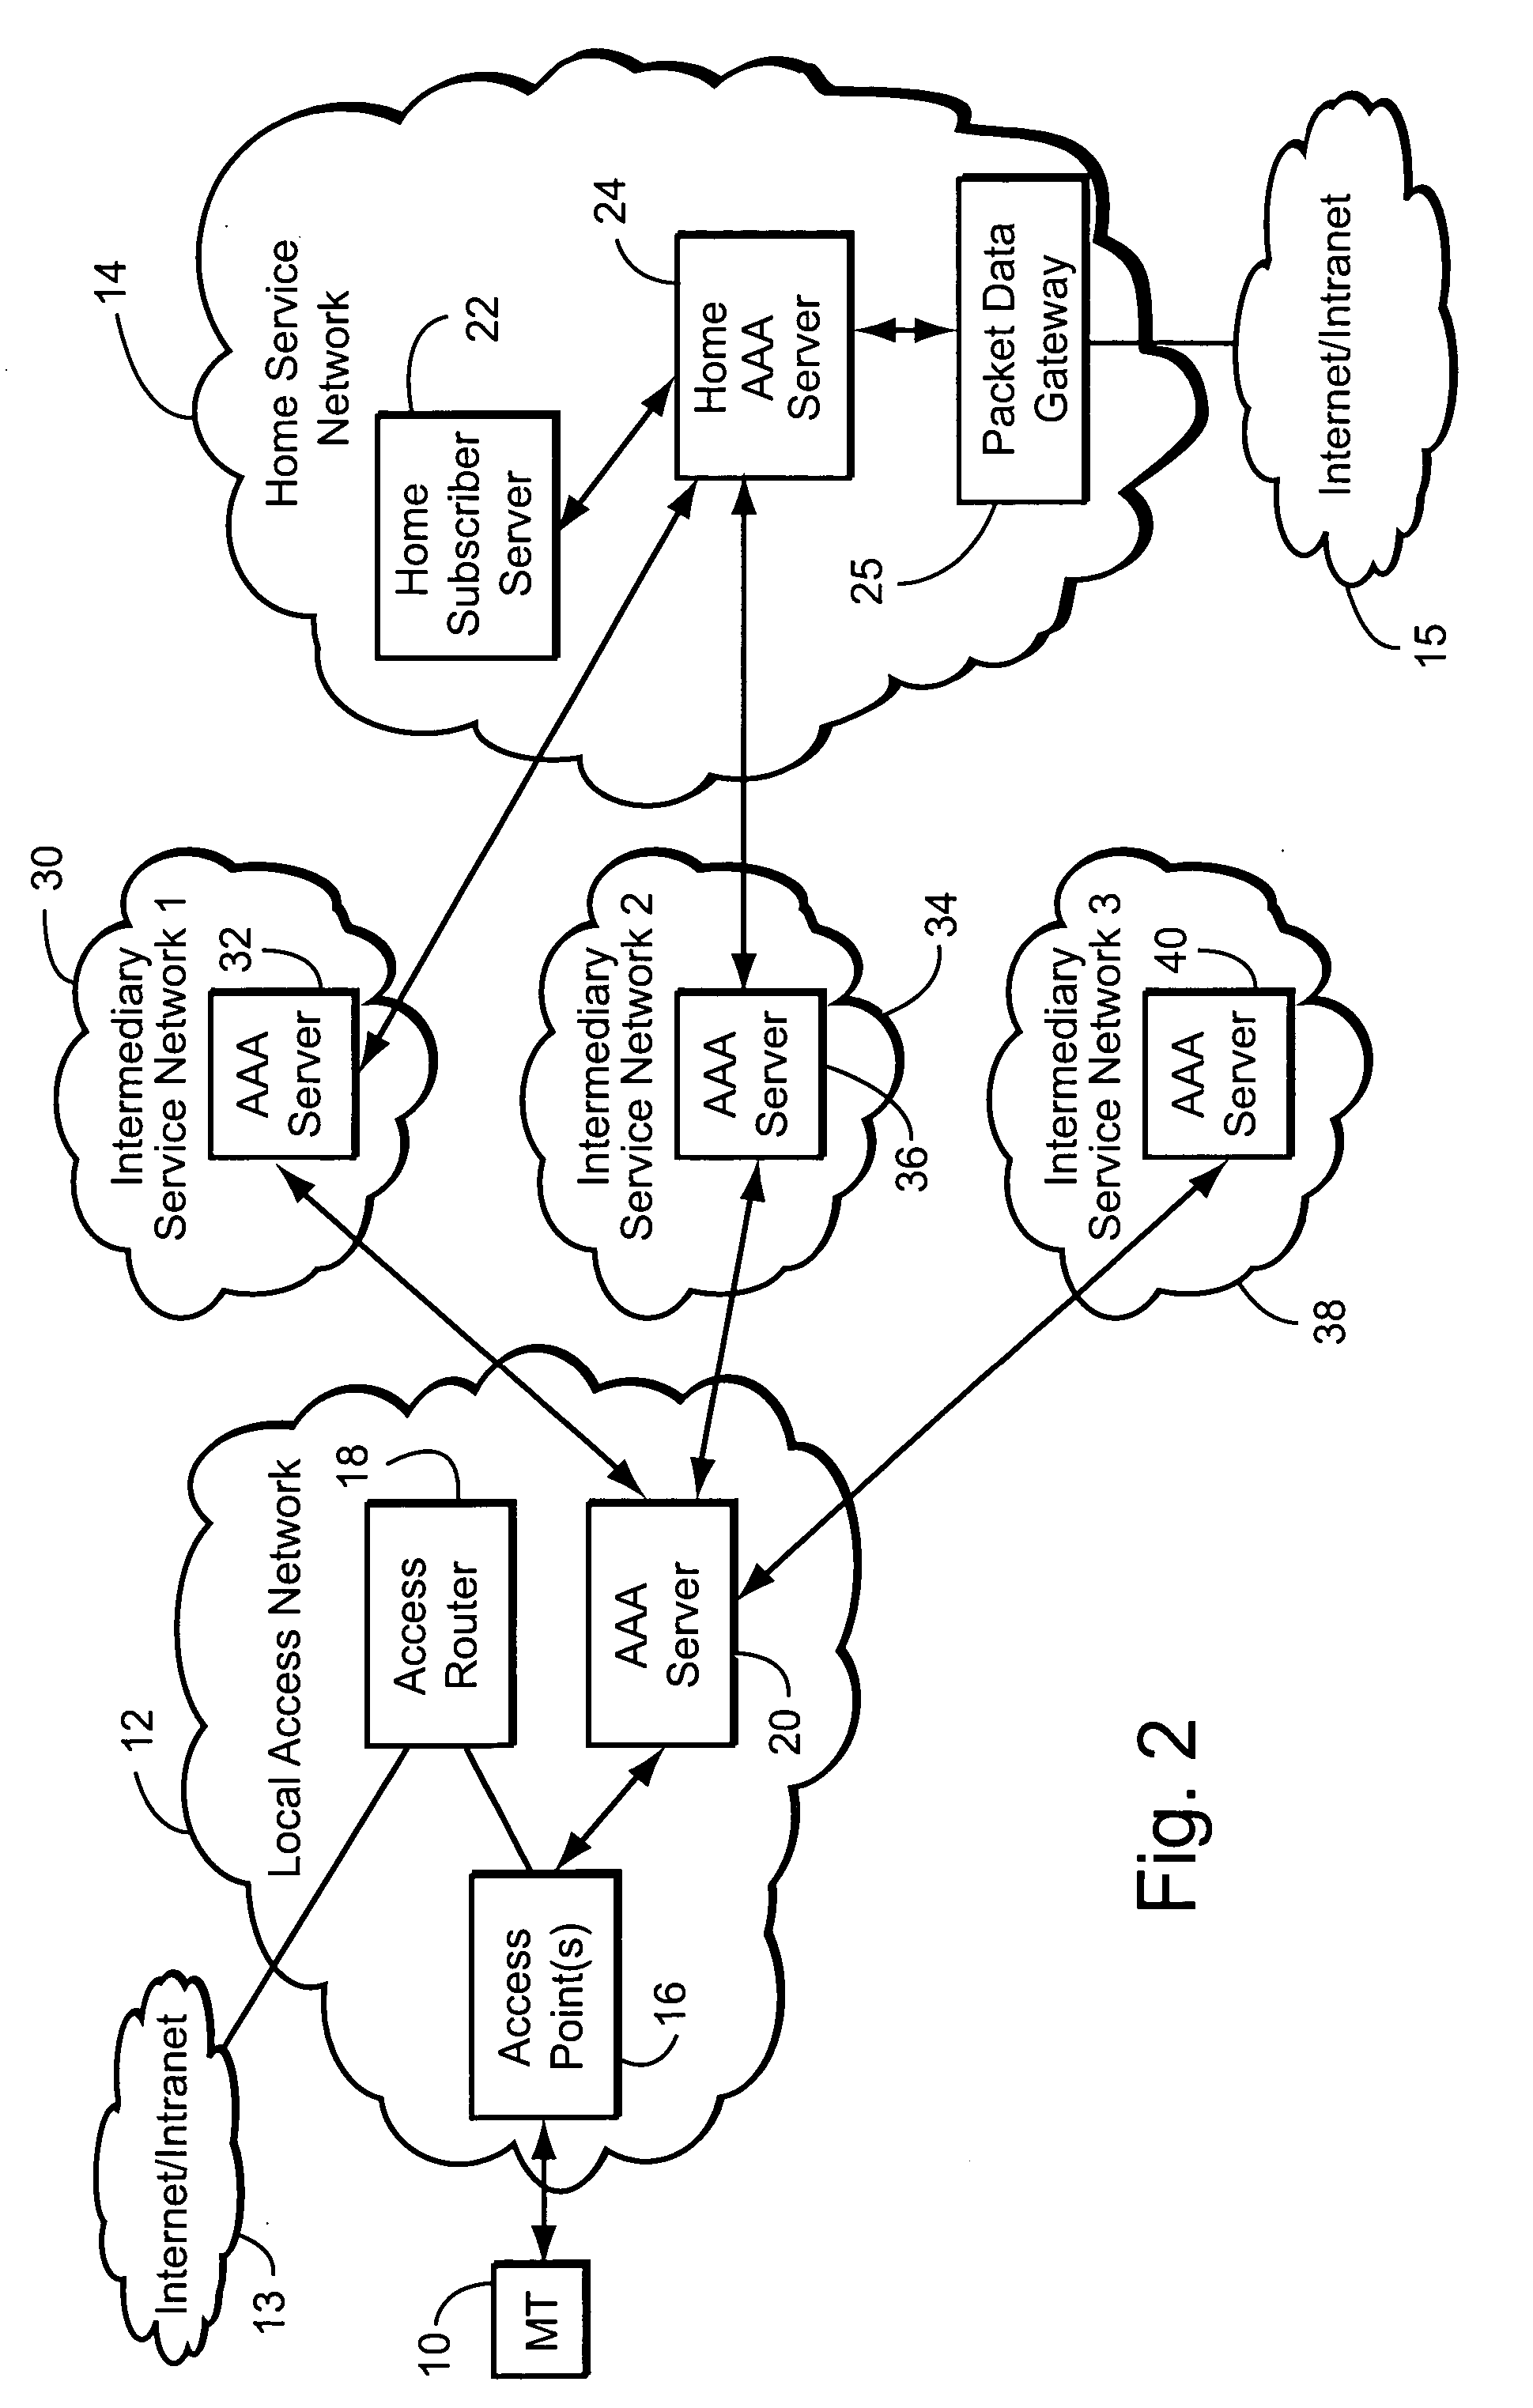 Home network-assisted selection of intermediary network for a roaming mobile terminal